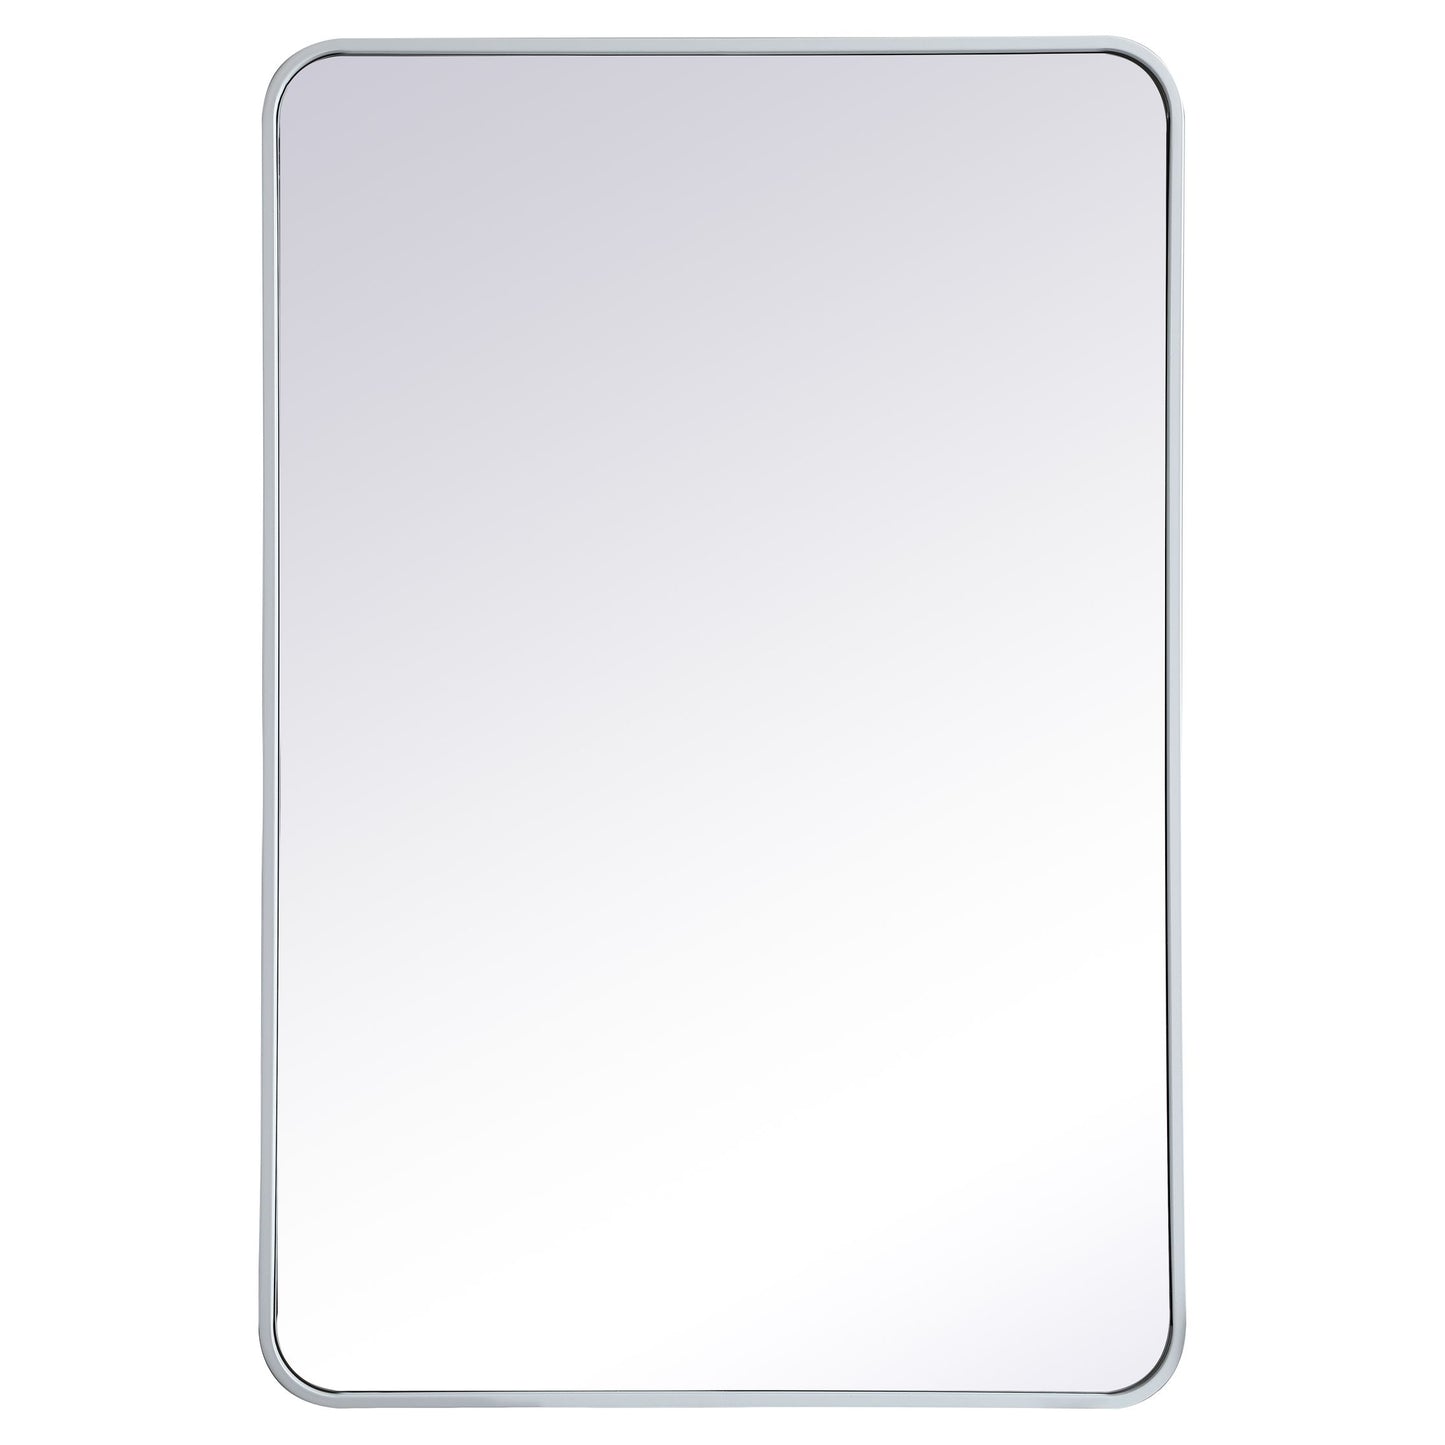 MR802740WH Evermore 27" x 40" Metal Framed Rectangular Mirror in White